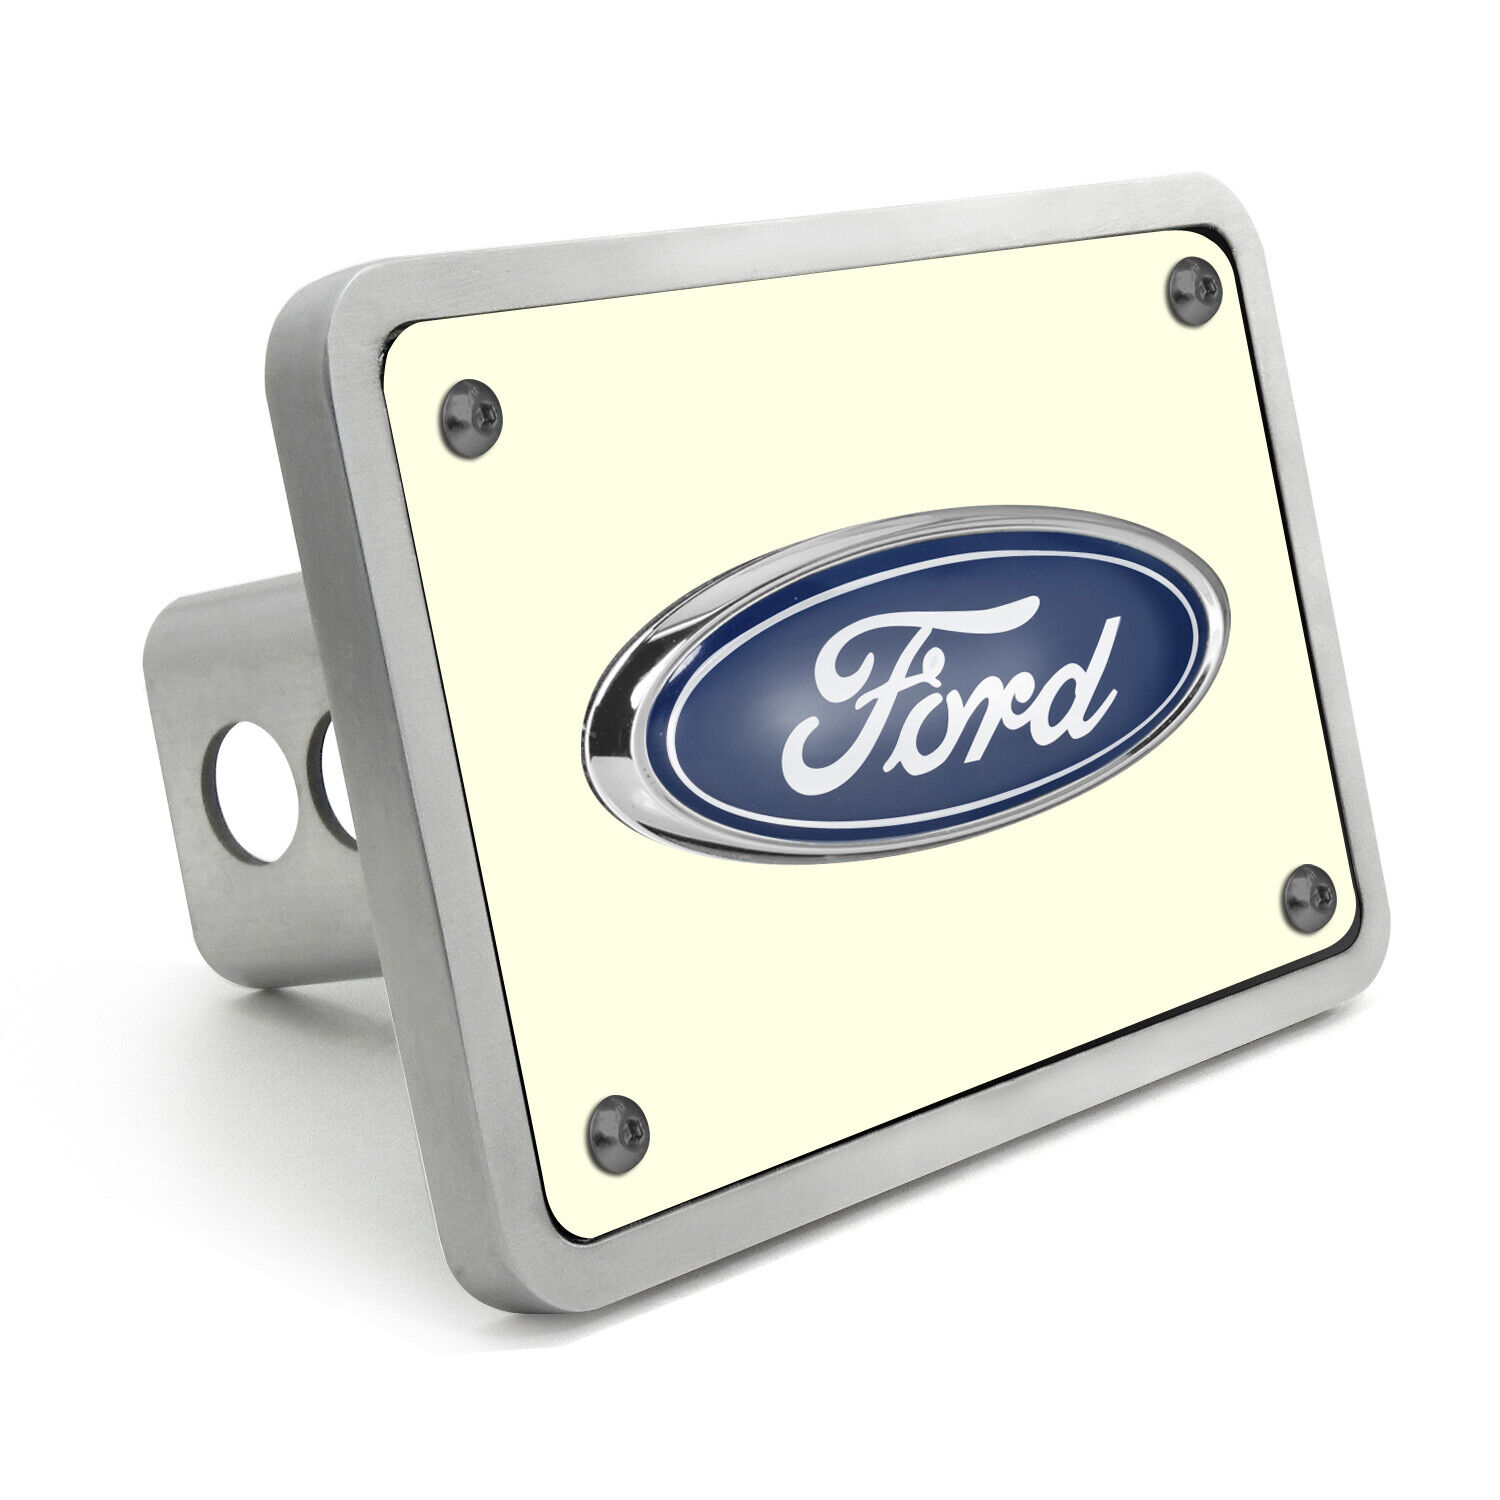 Ford 3D Logo Night Glow Luminescent Billet Aluminum 2 inch Tow Hitch Cover